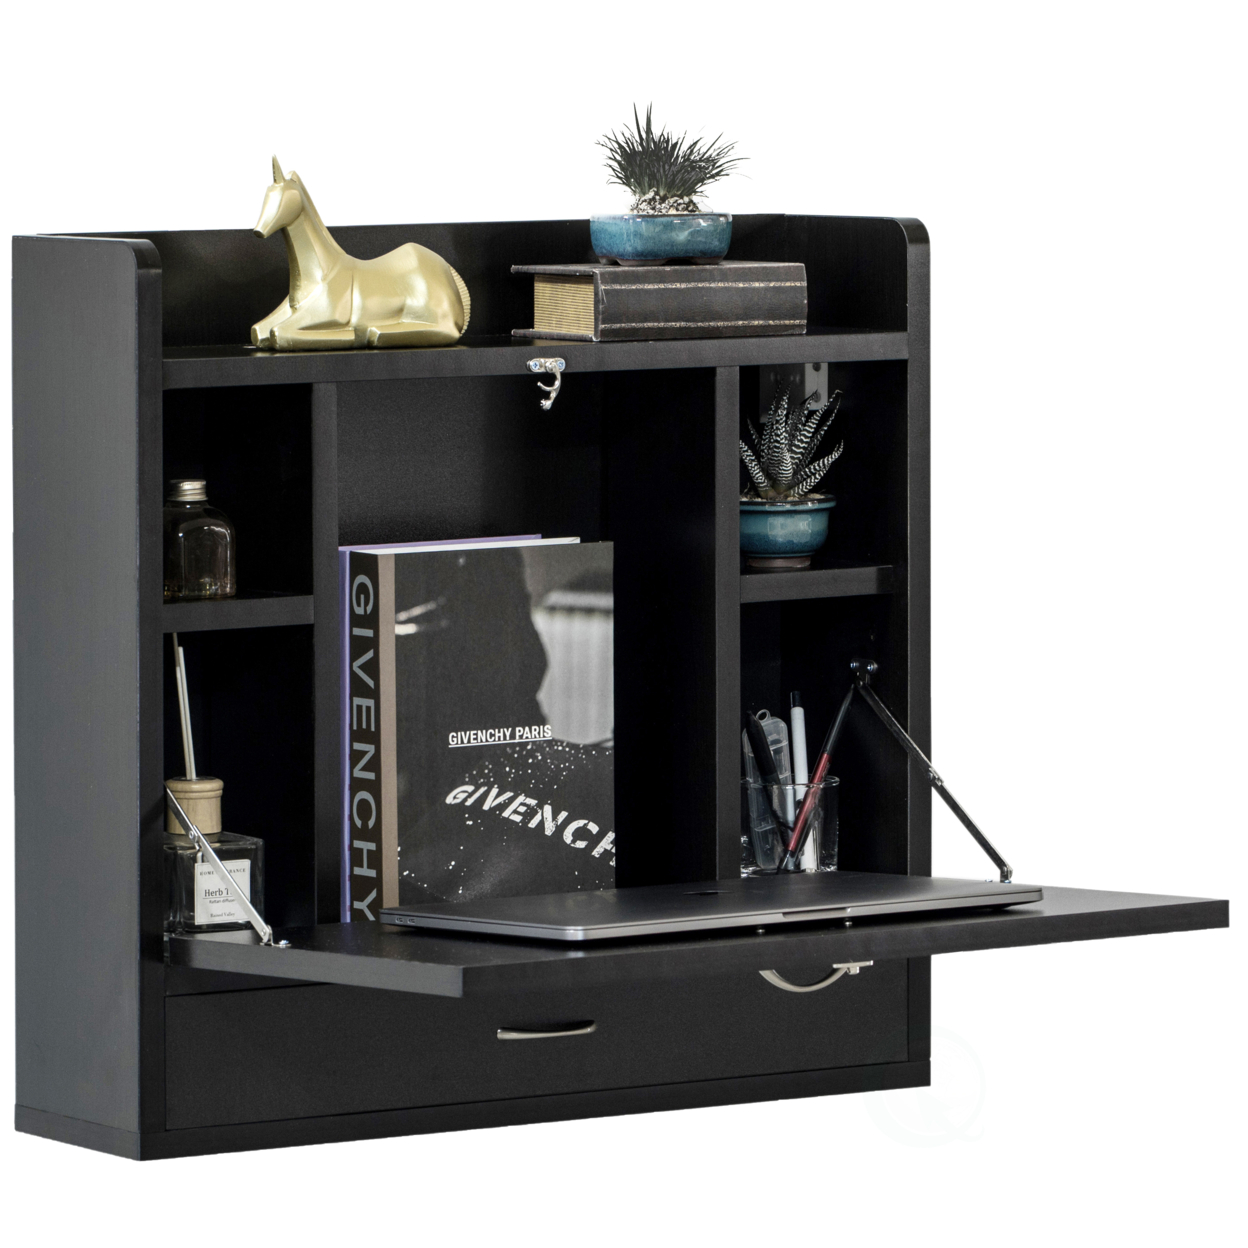 Wall Mount Folding Laptop Writing Computer Or Makeup Desk With Storage Shelves And Drawer - Black